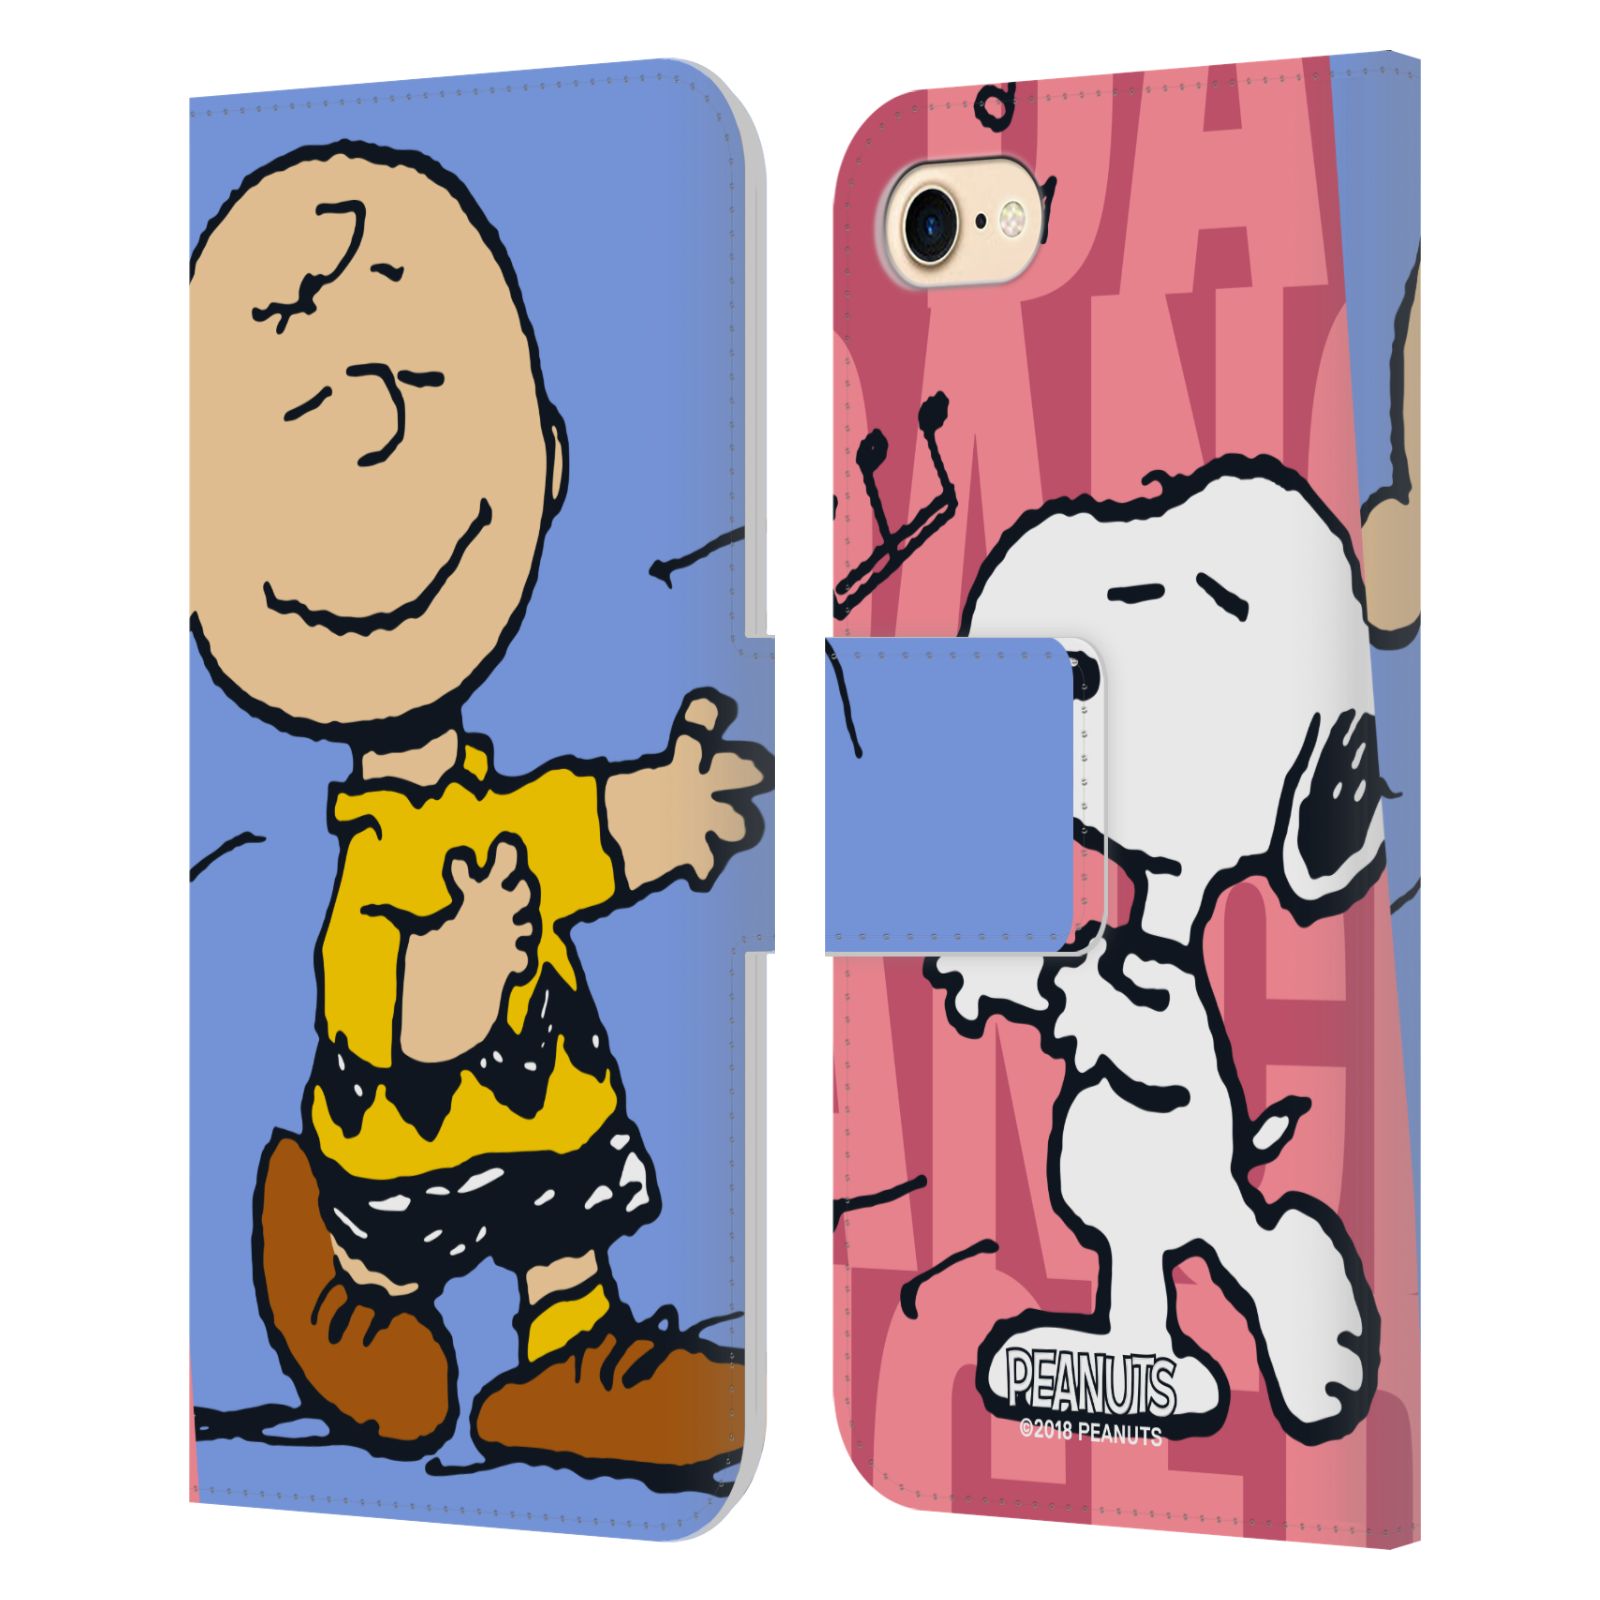 Pouzdro na mobil Apple Iphone 7 / 8 - Head Case - Peanuts - Snoopy a Charlie